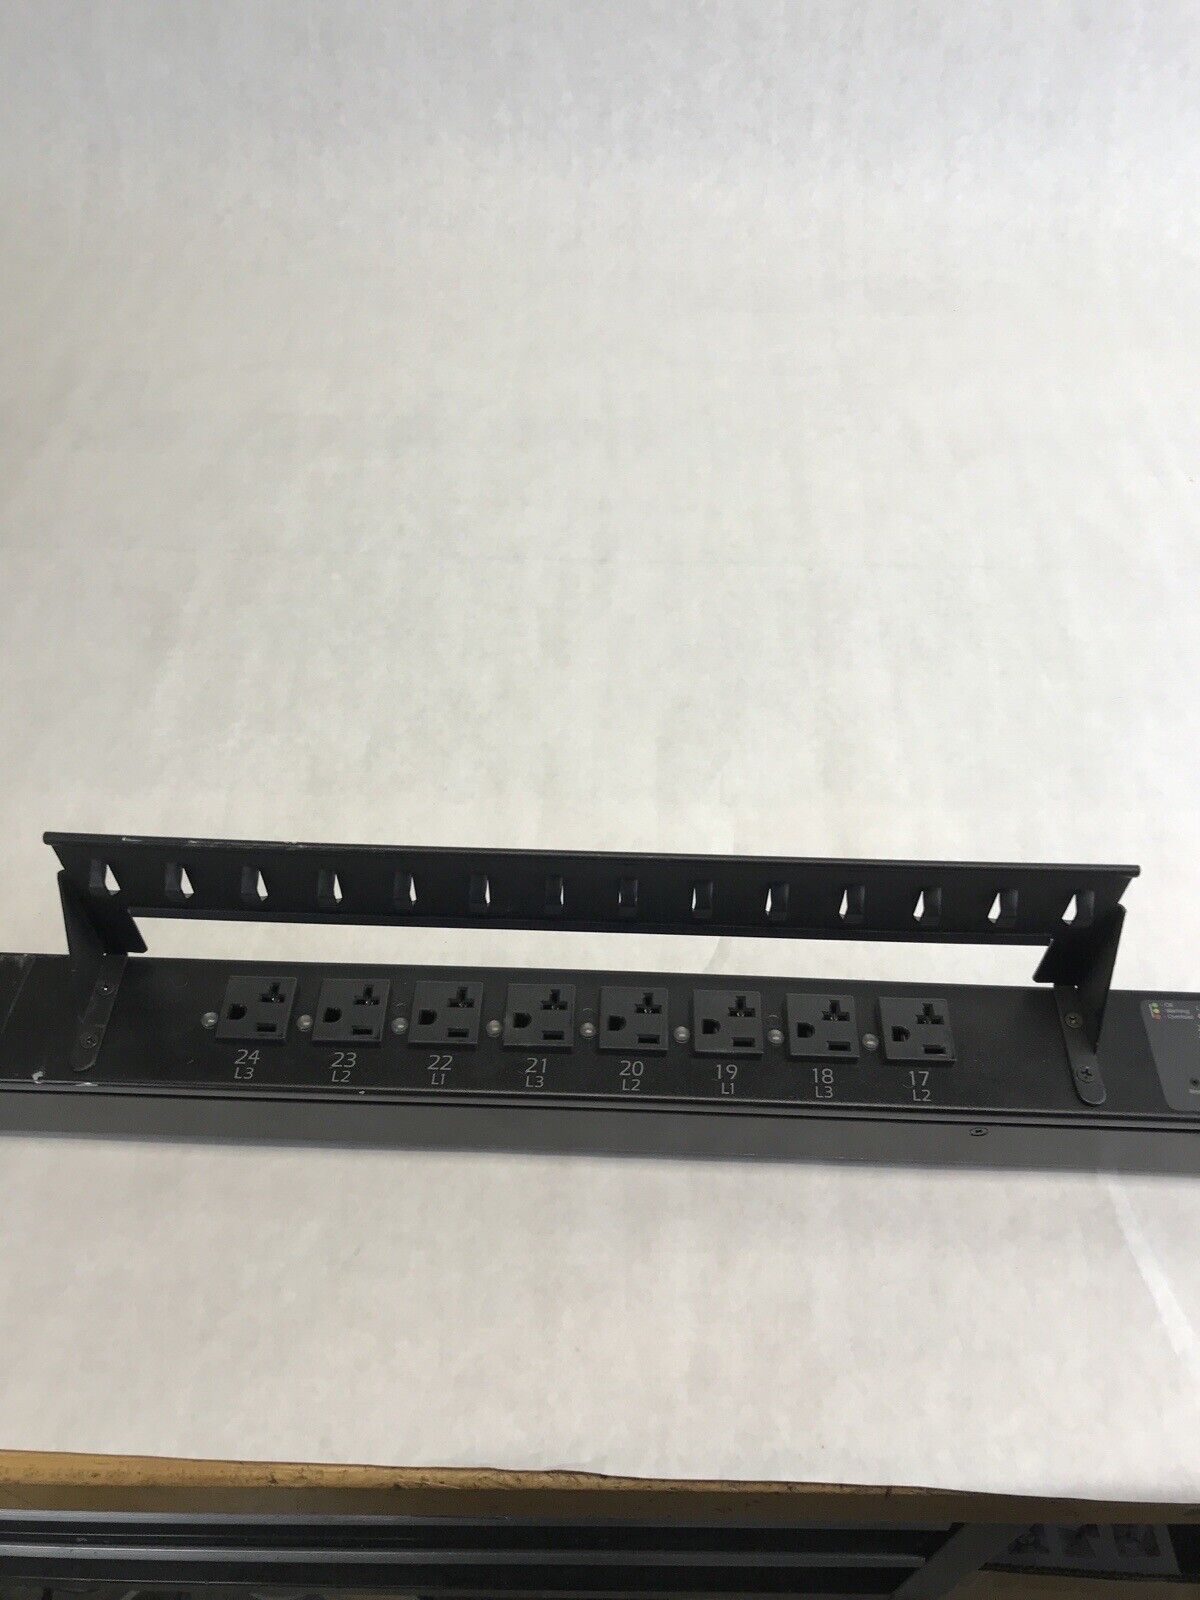 APC AP7990 Switched Rack PDU (Tested and Working)